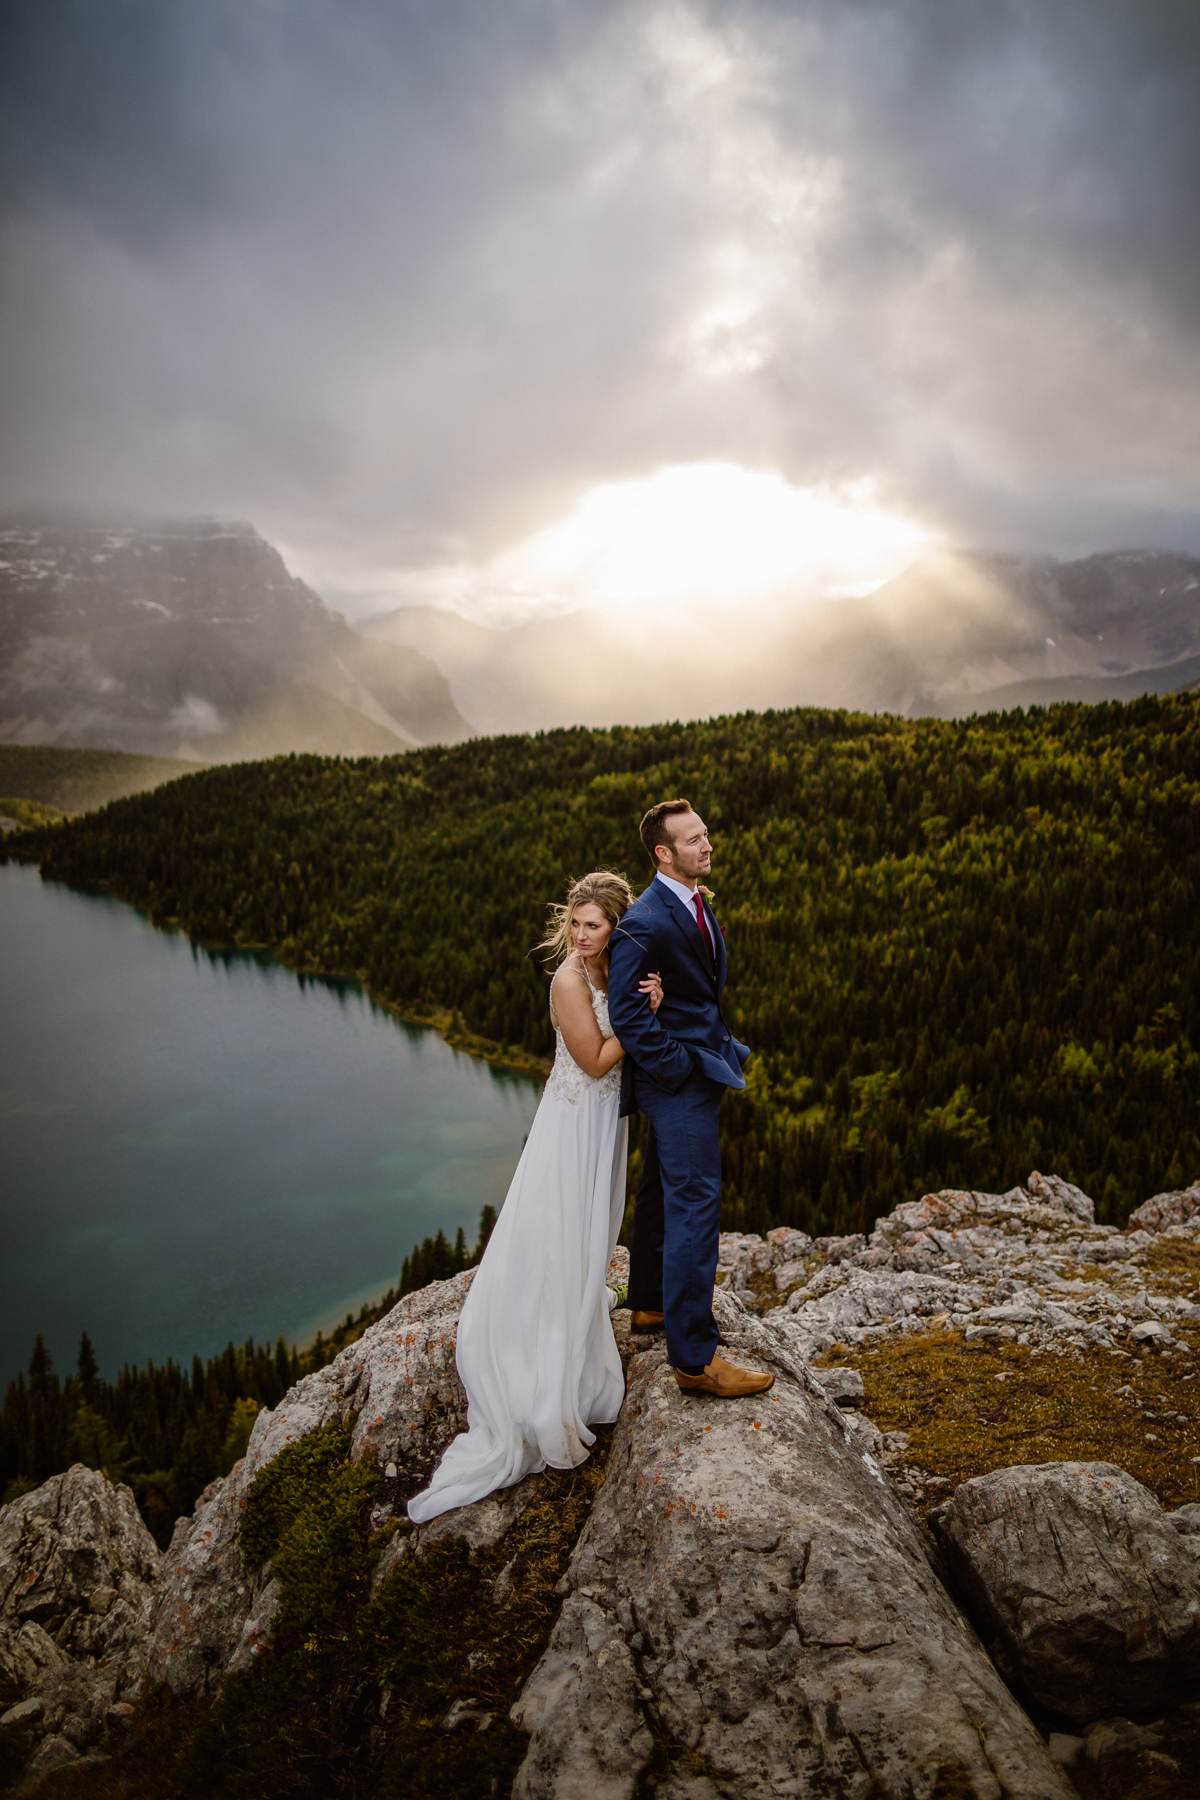 Mount Assiniboine Elopement Photographers at a Backcountry Lodge - Photo 32